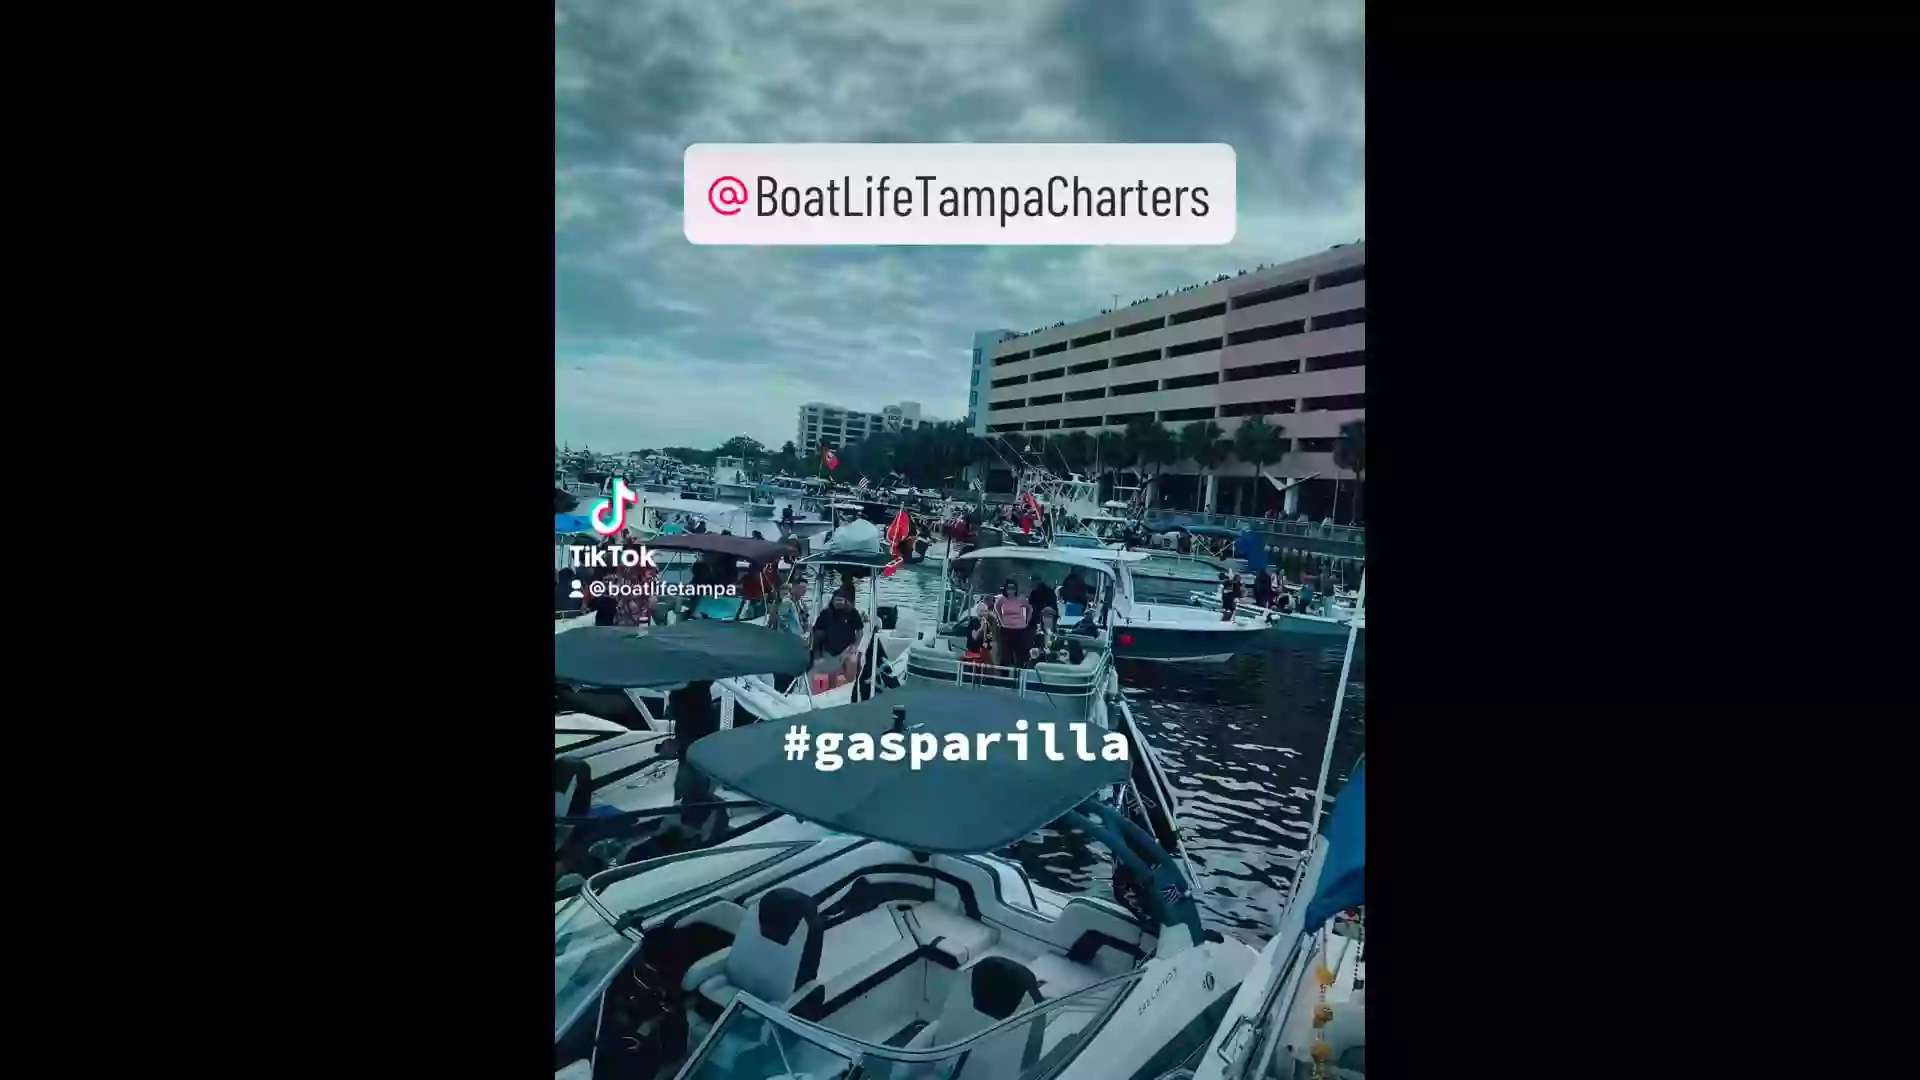 Boat Life Tampa Charters